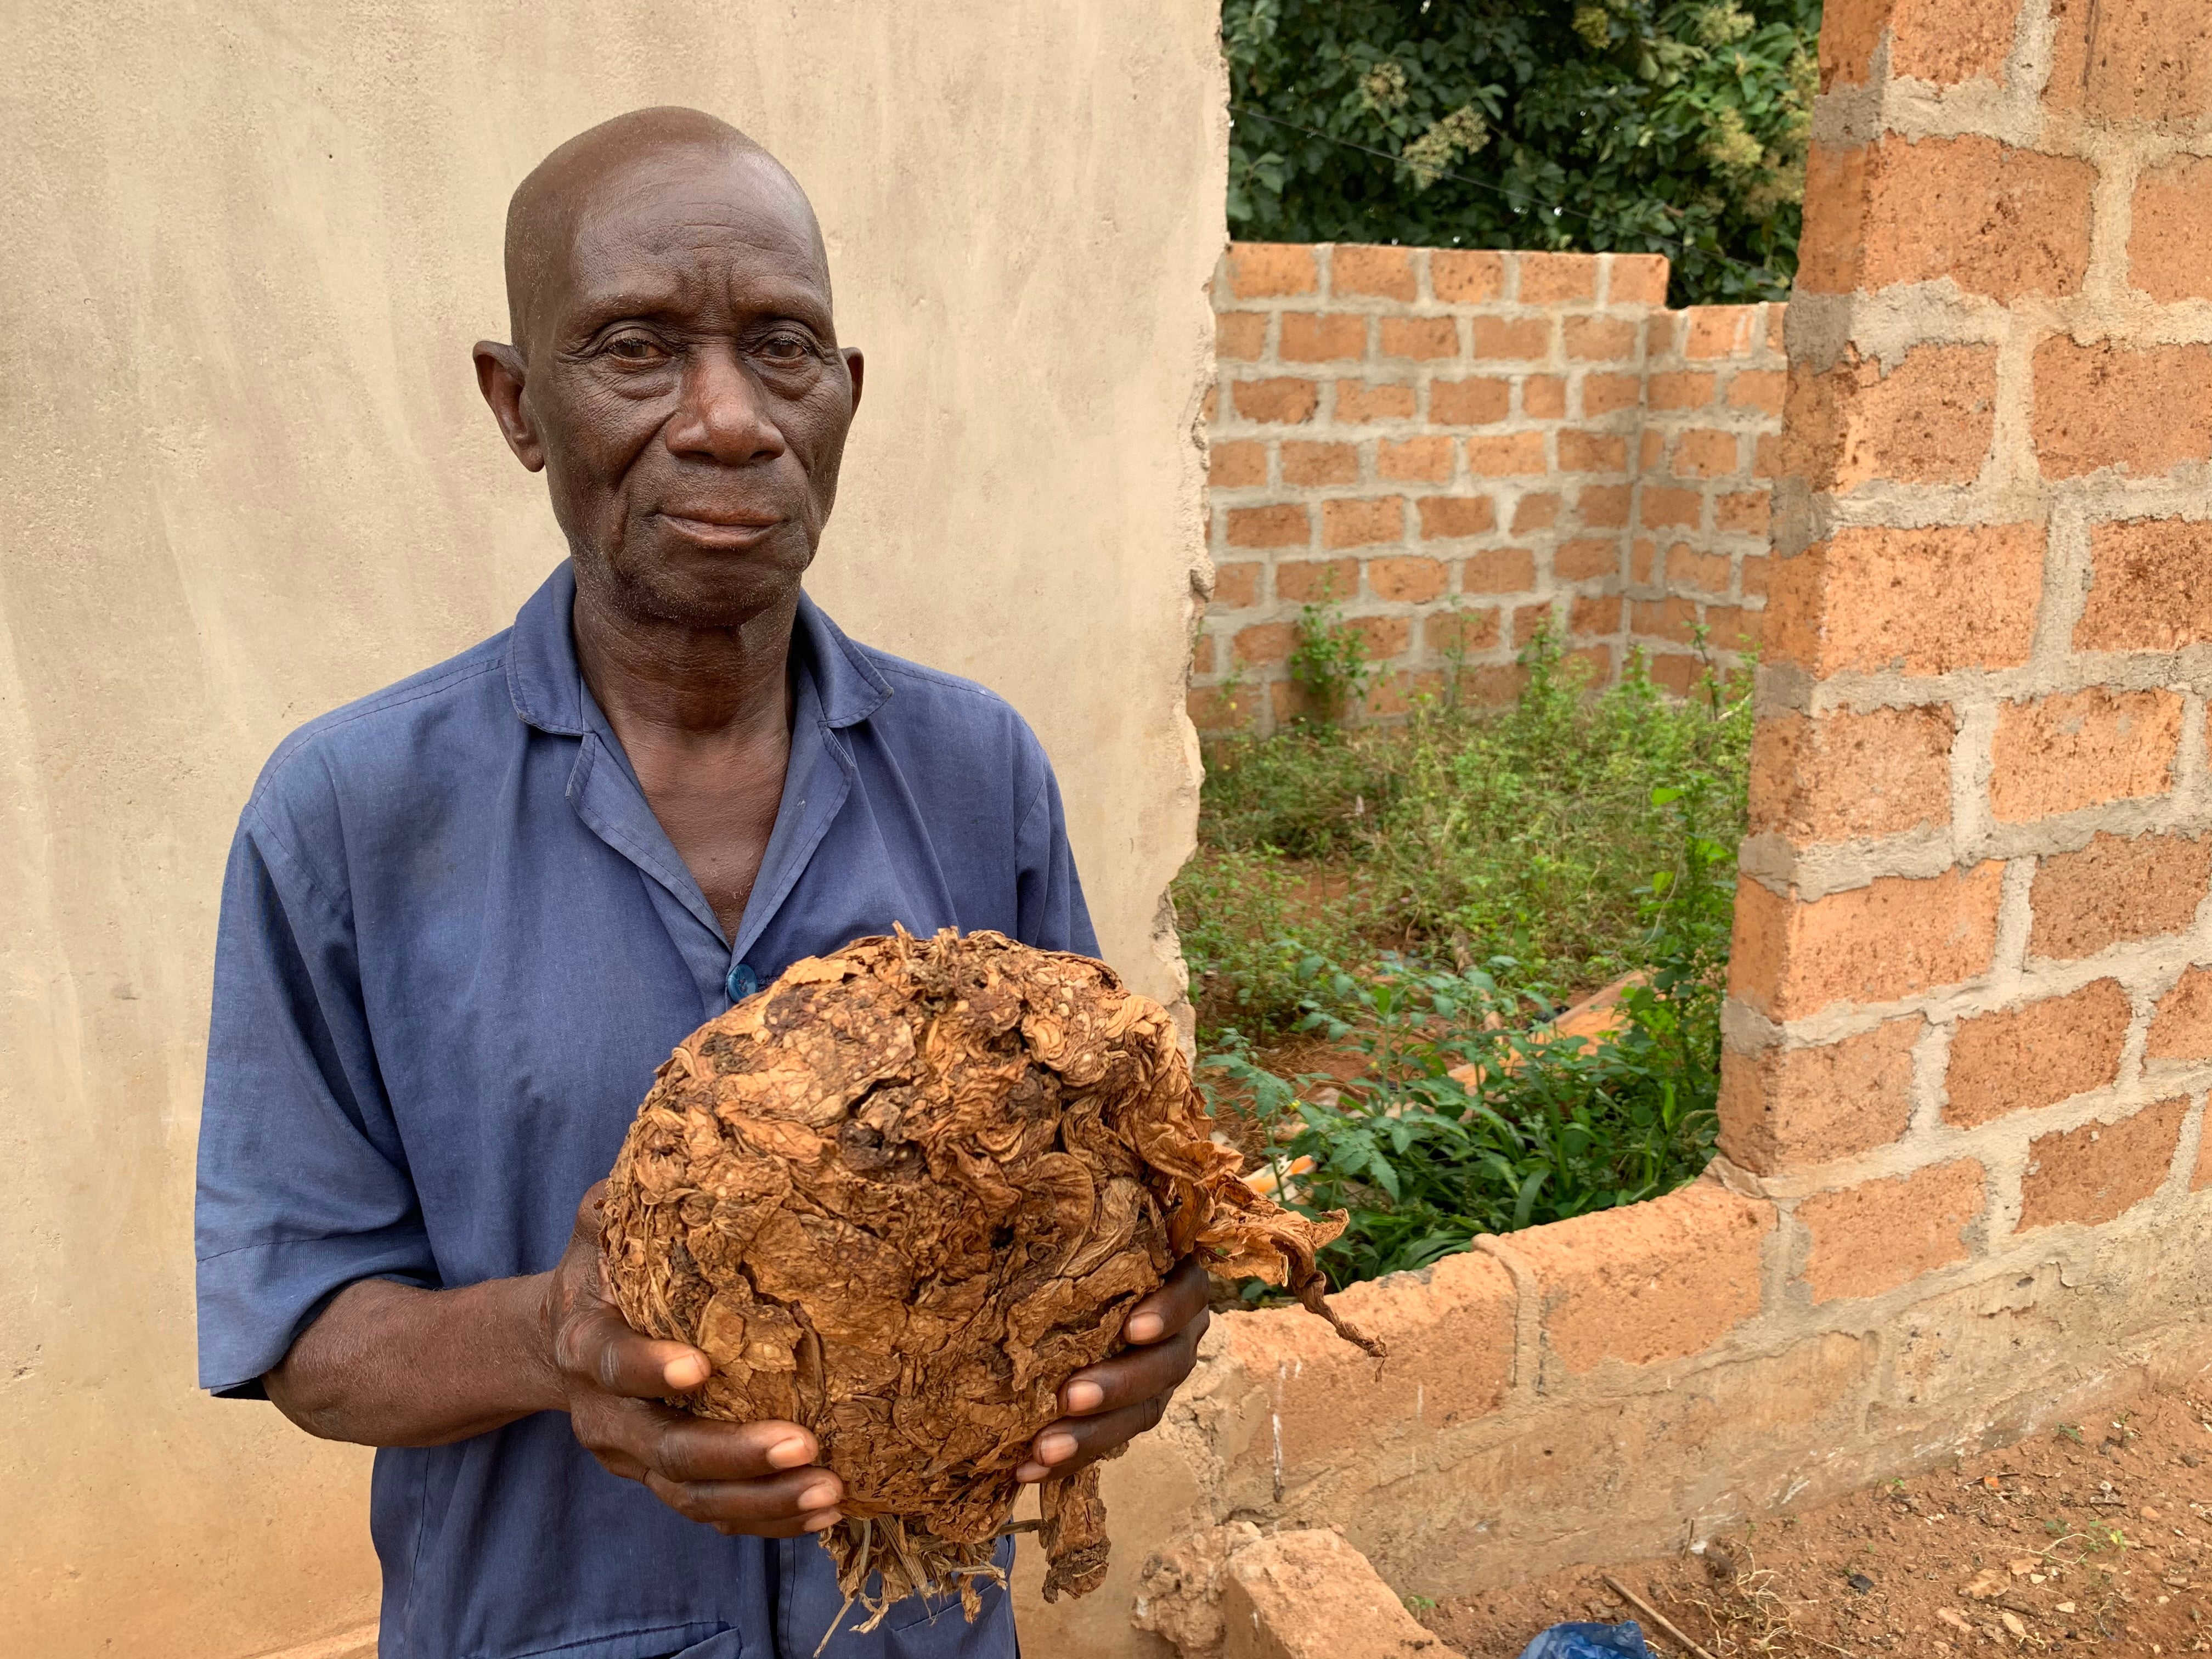 Dah Djika Dégbo, 73, with the tobacco crop first brought to his village by his Amazon step-grandmother, Yaketou